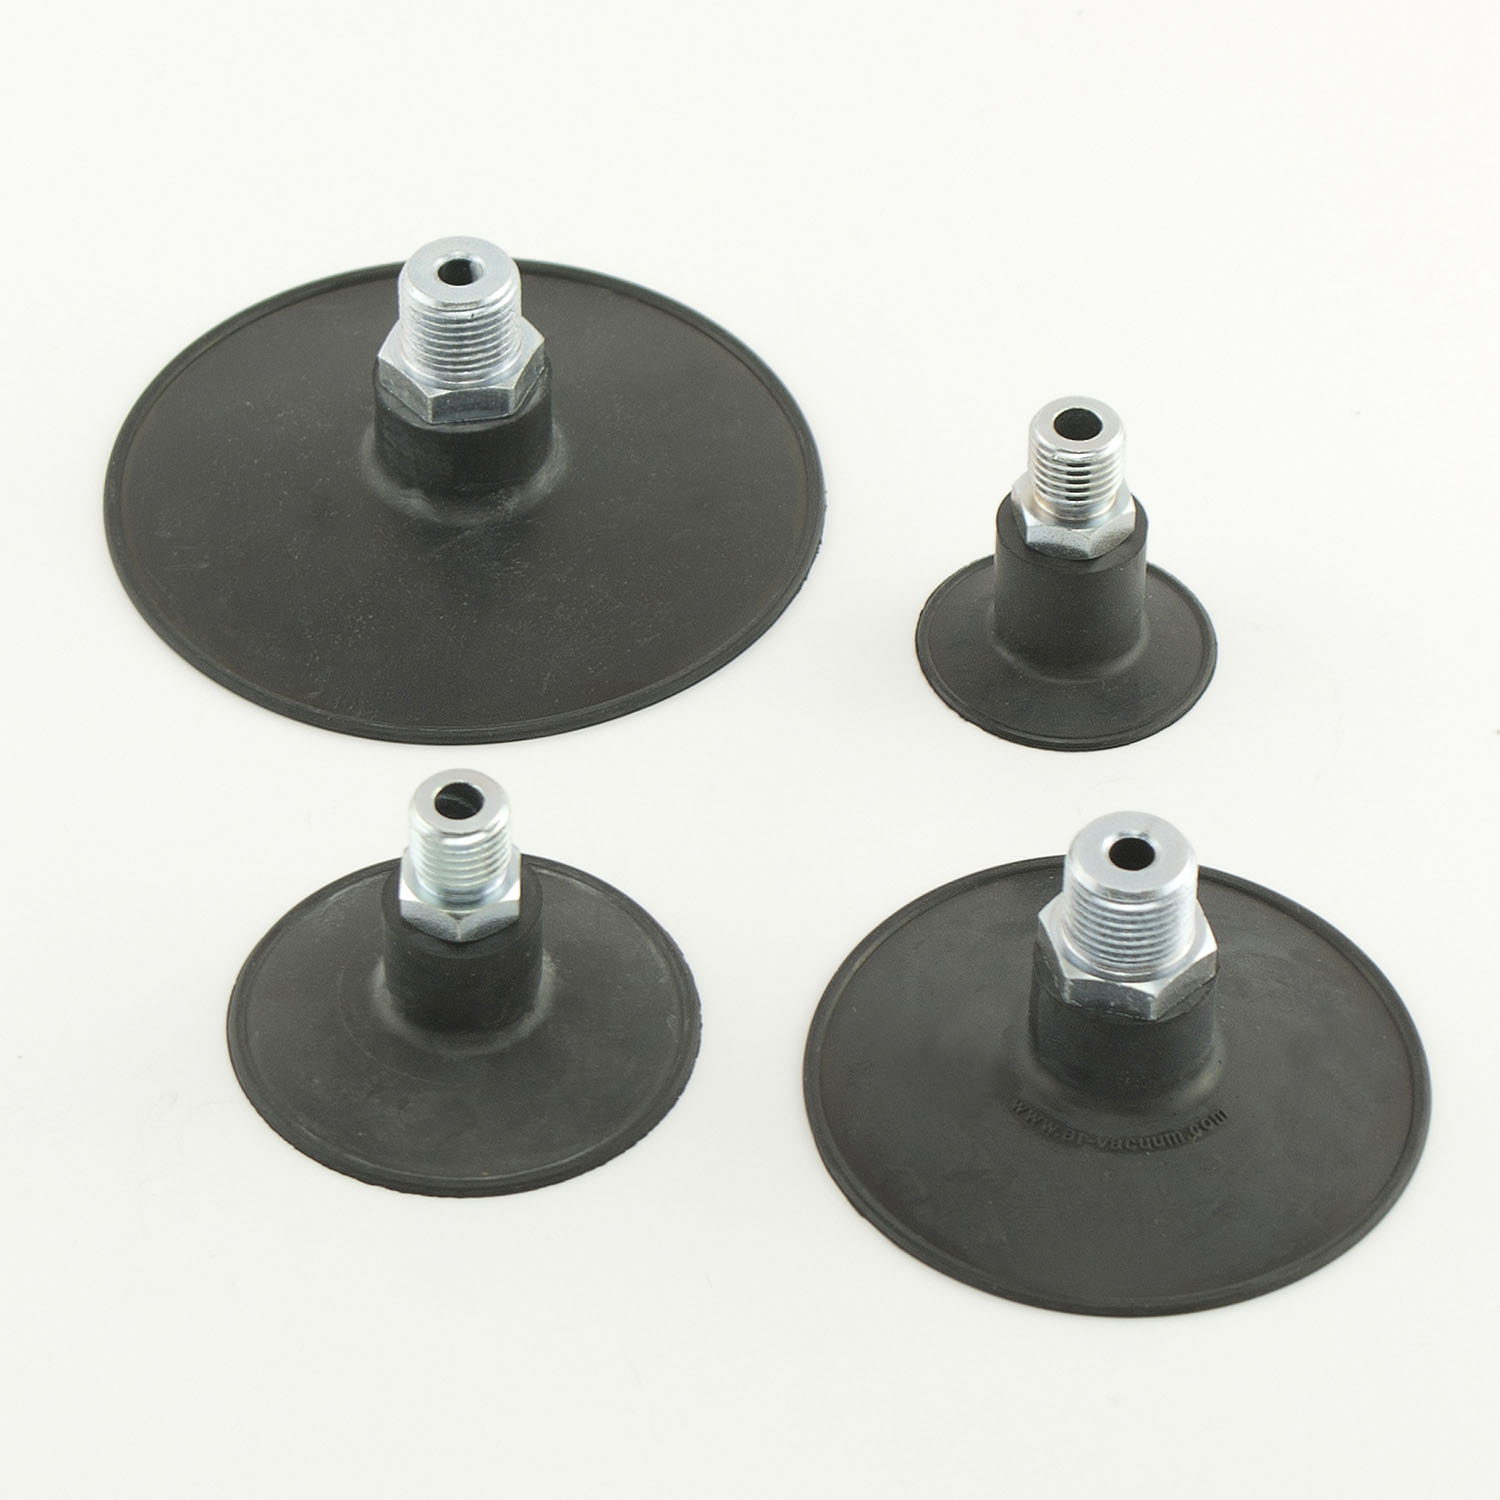 Flat suction cups